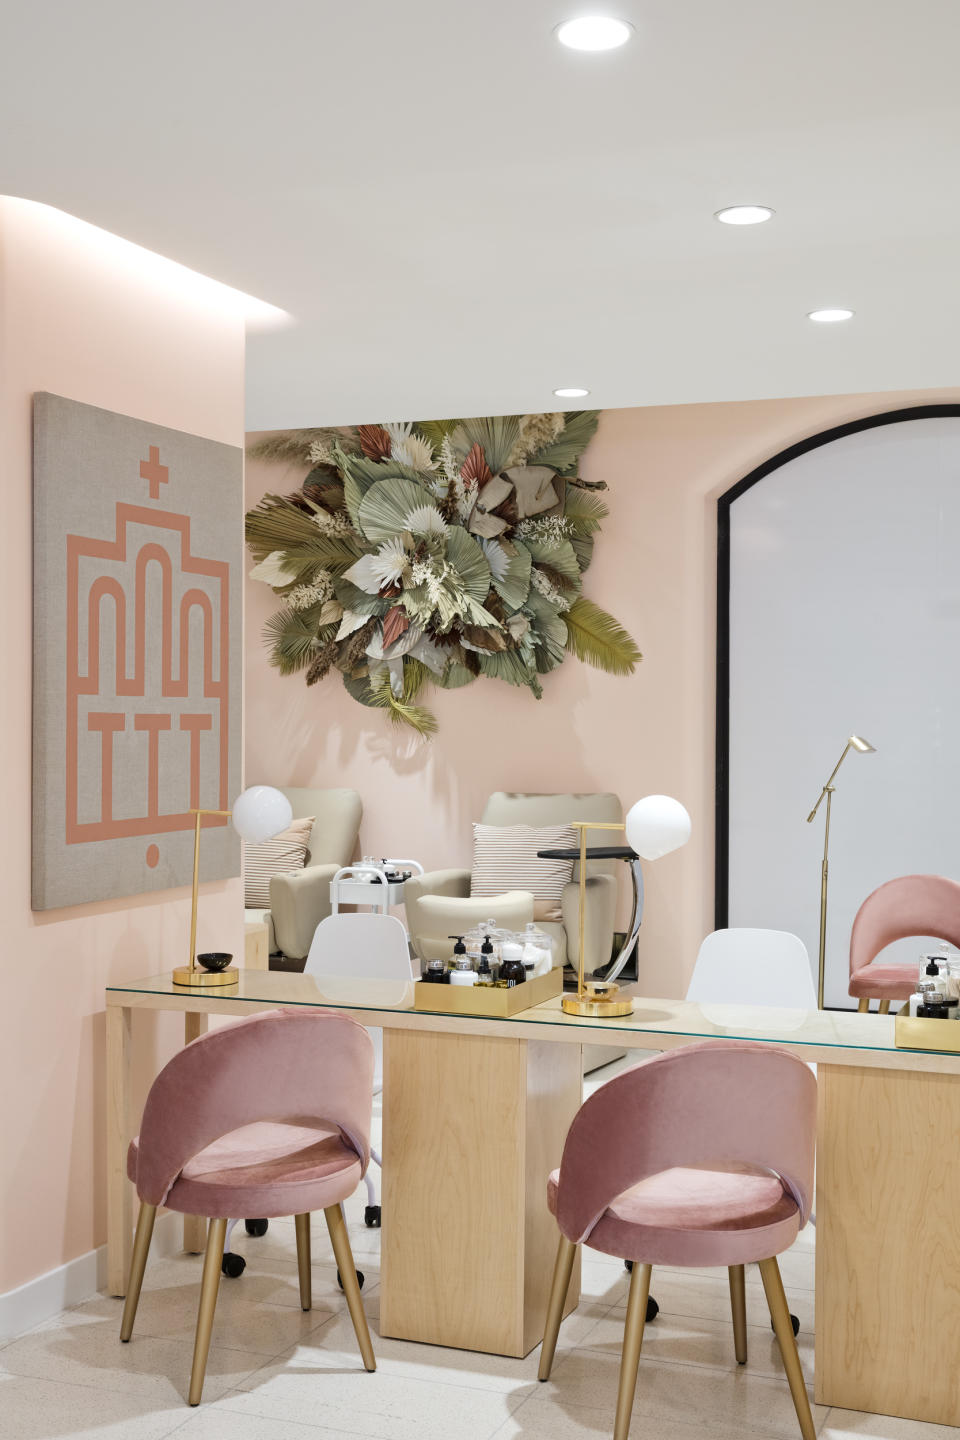 Services such as spa treatments, nails and brows are offered at Nordstrom’s NYC flagship. - Credit: Courtesy Image.